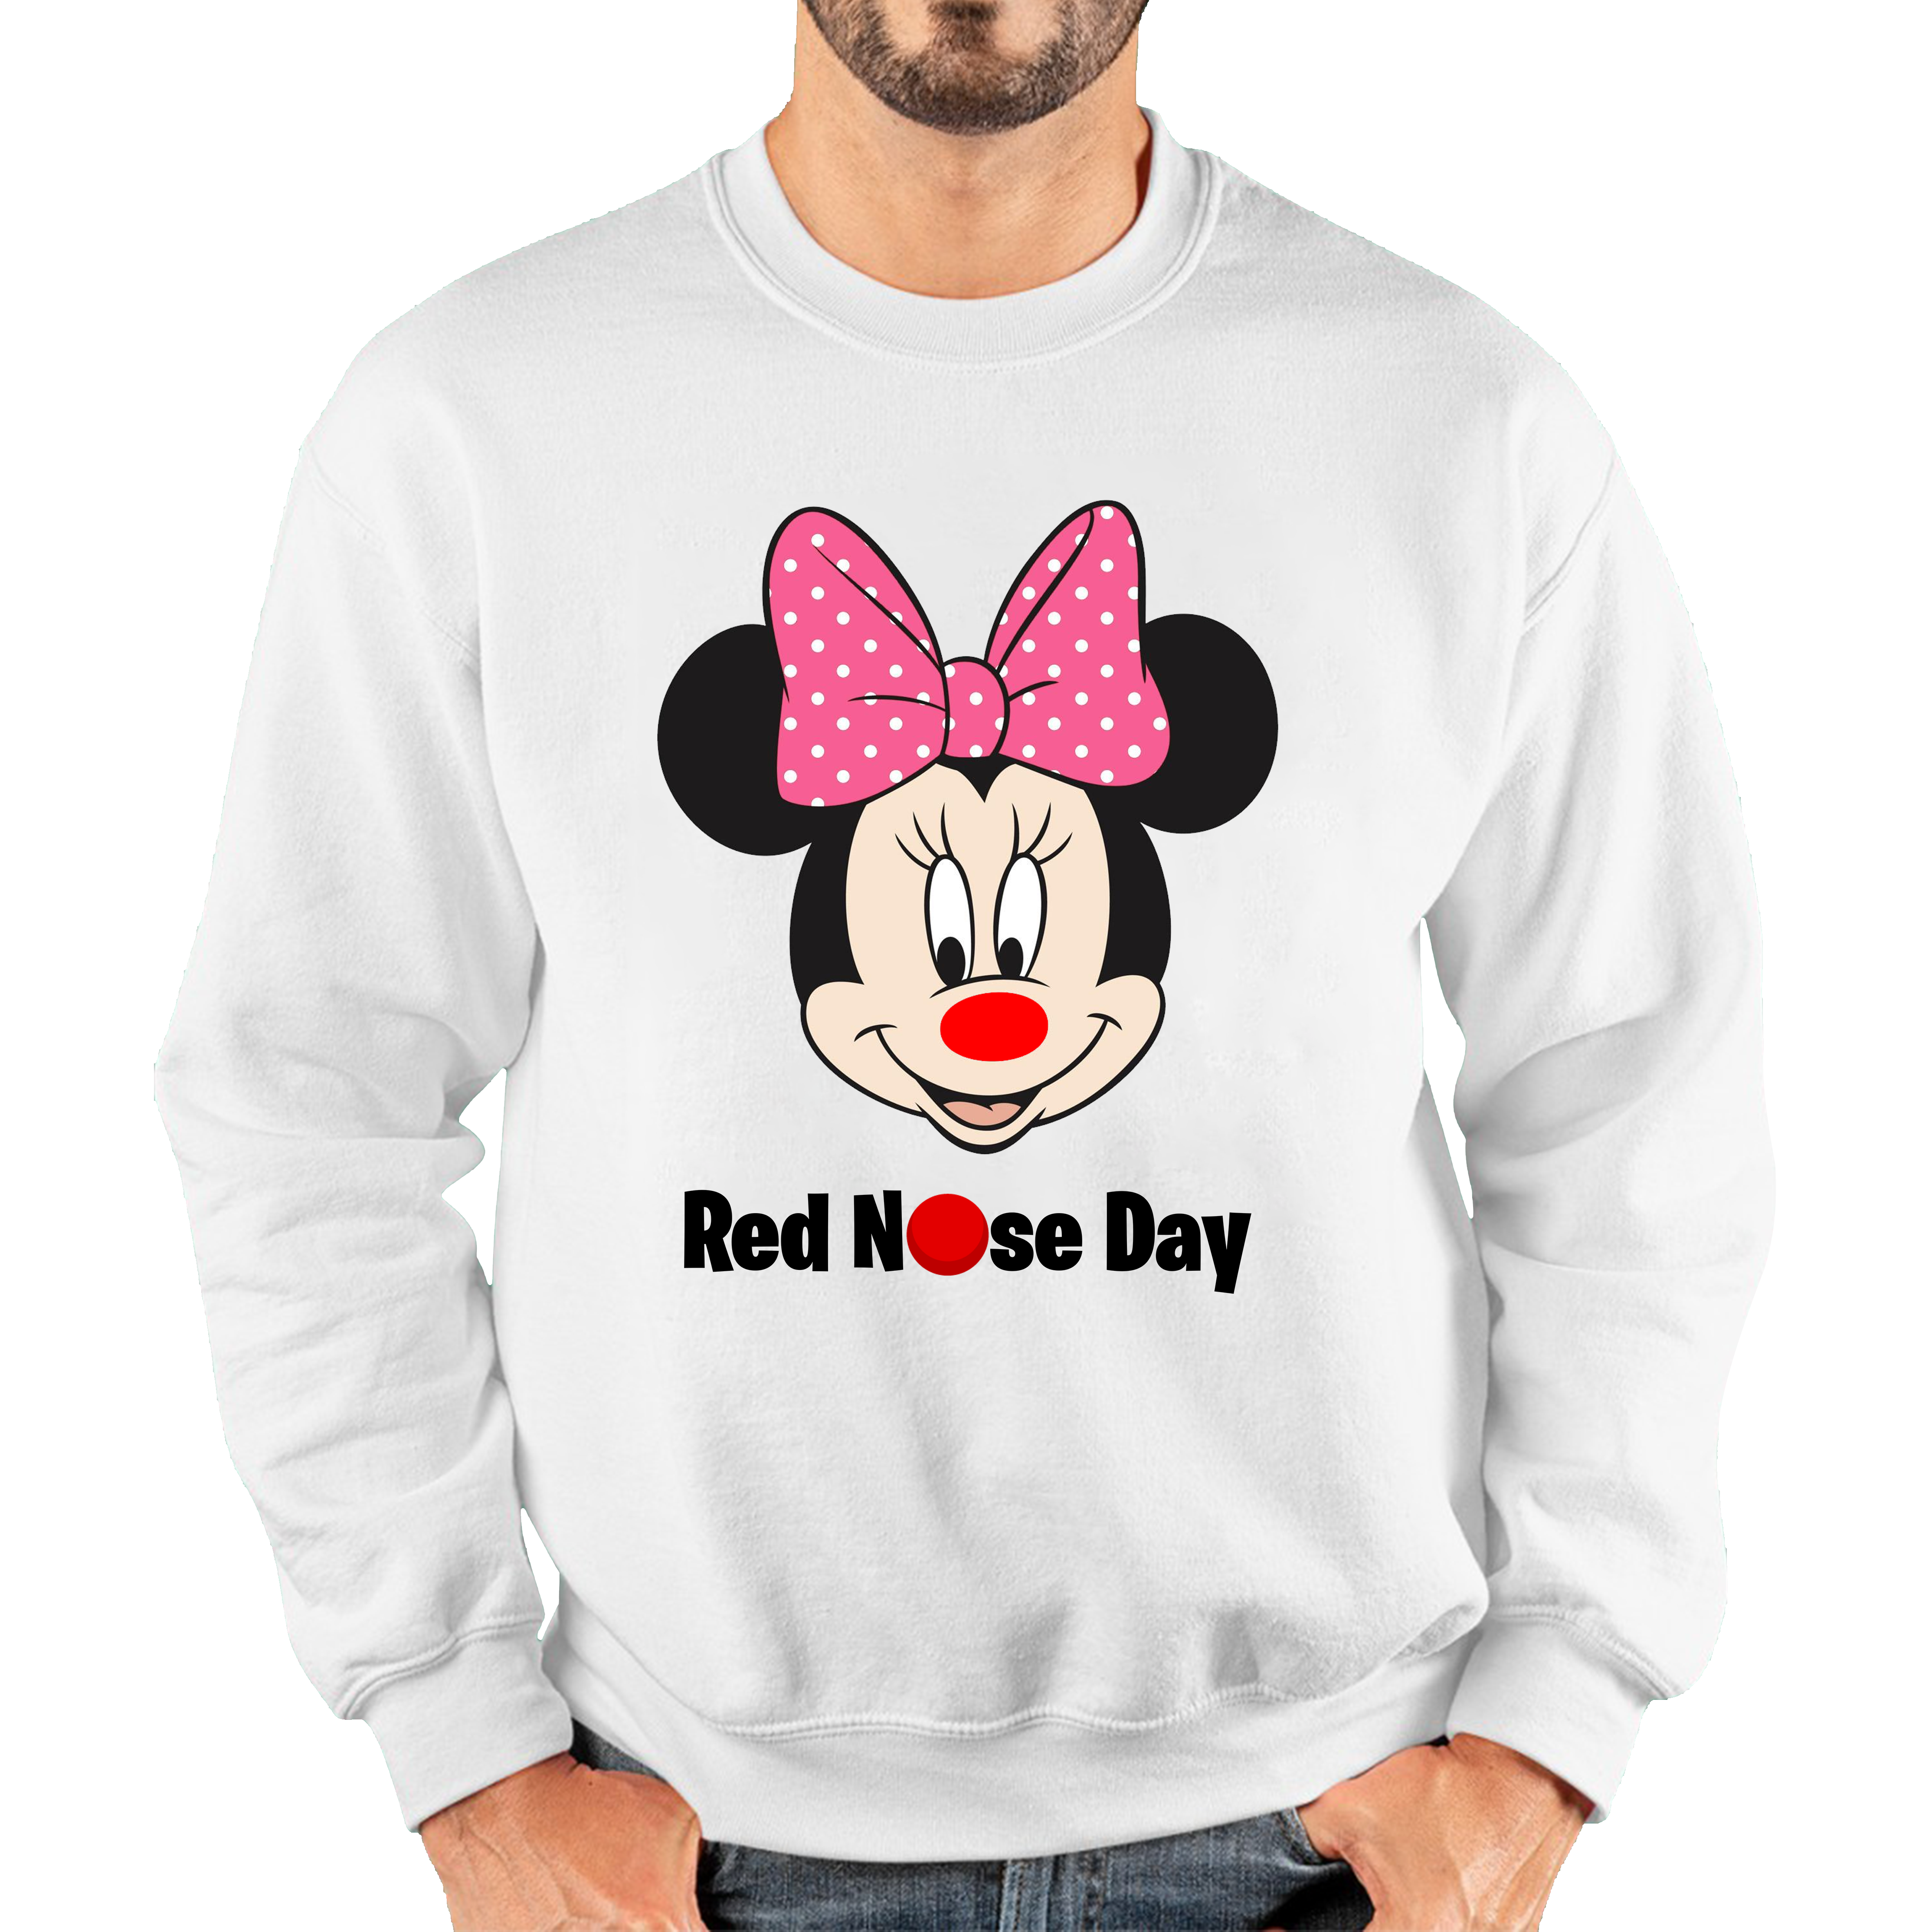 Disney Minnie Mouse Red Nose Day Adult Sweatshirt. 50% Goes To Charity